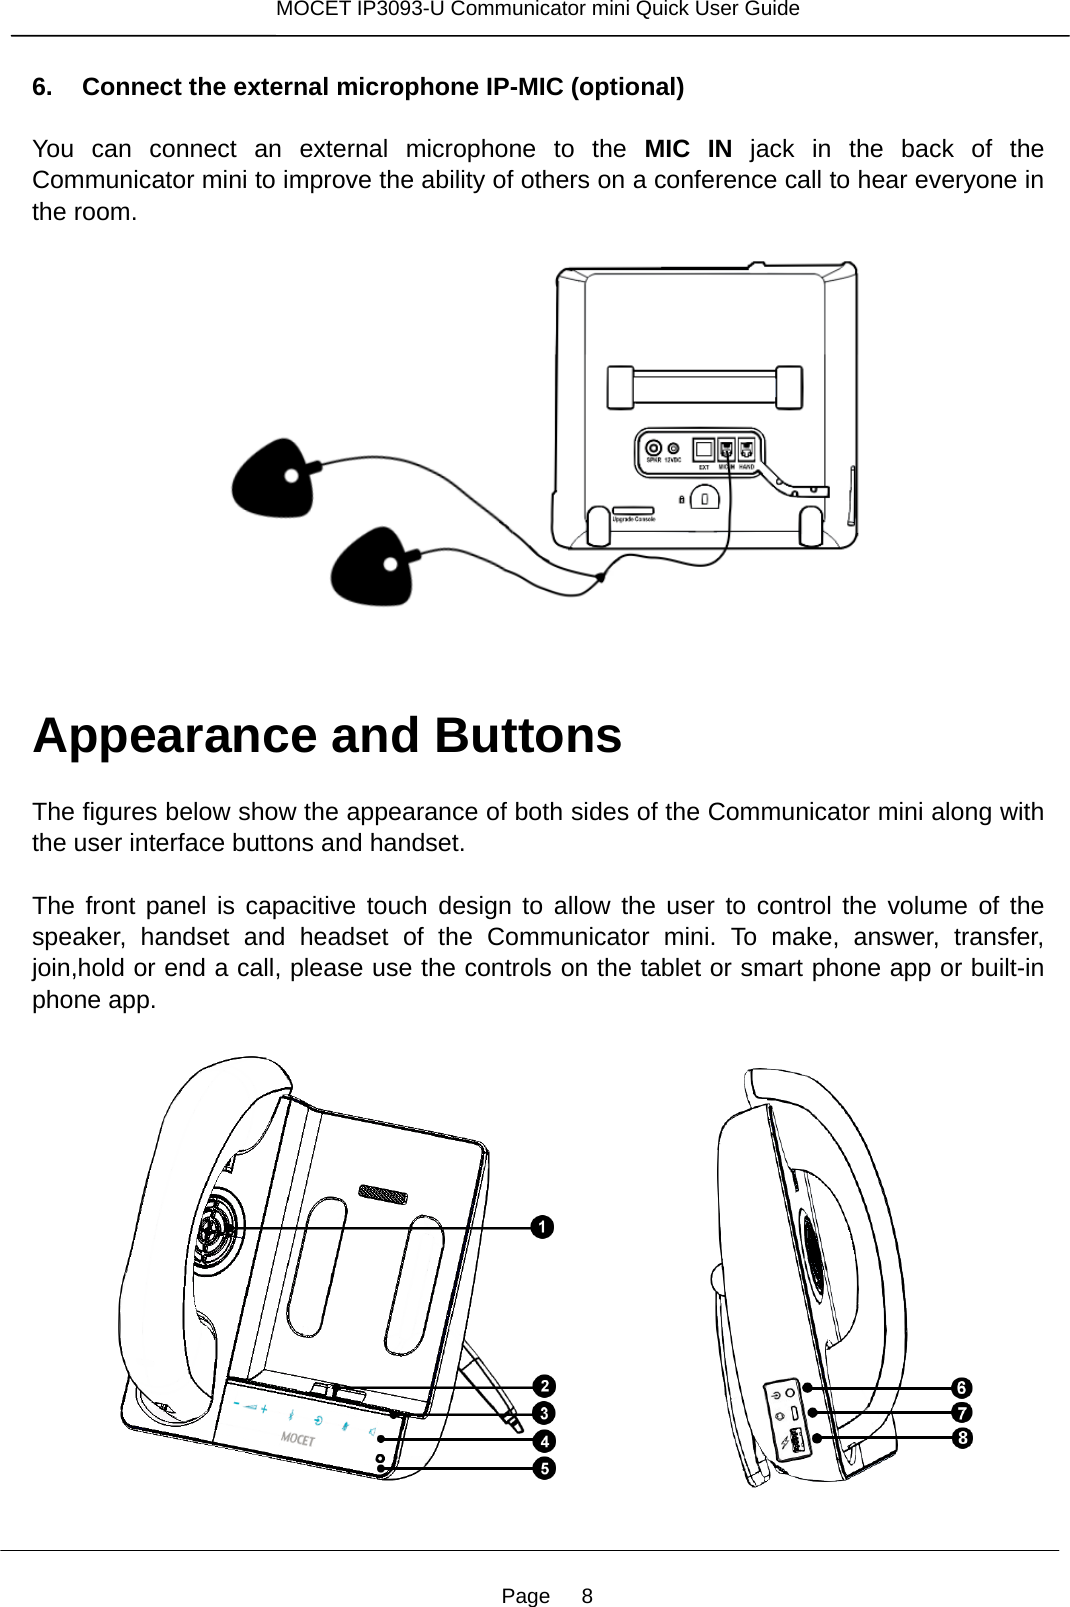 Page   8 MOCET IP3093-U Communicator mini Quick User Guide  6. Connect the external microphone IP-MIC (optional)  You can connect an external microphone to the MIC IN jack in the back of the Communicator mini to improve the ability of others on a conference call to hear everyone in the room.        Appearance and Buttons  The figures below show the appearance of both sides of the Communicator mini along with the user interface buttons and handset.    The front panel is capacitive touch design to allow the user to control the volume of the speaker, handset and headset of the Communicator mini. To make, answer, transfer, join,hold or end a call, please use the controls on the tablet or smart phone app or built-in phone app.                    